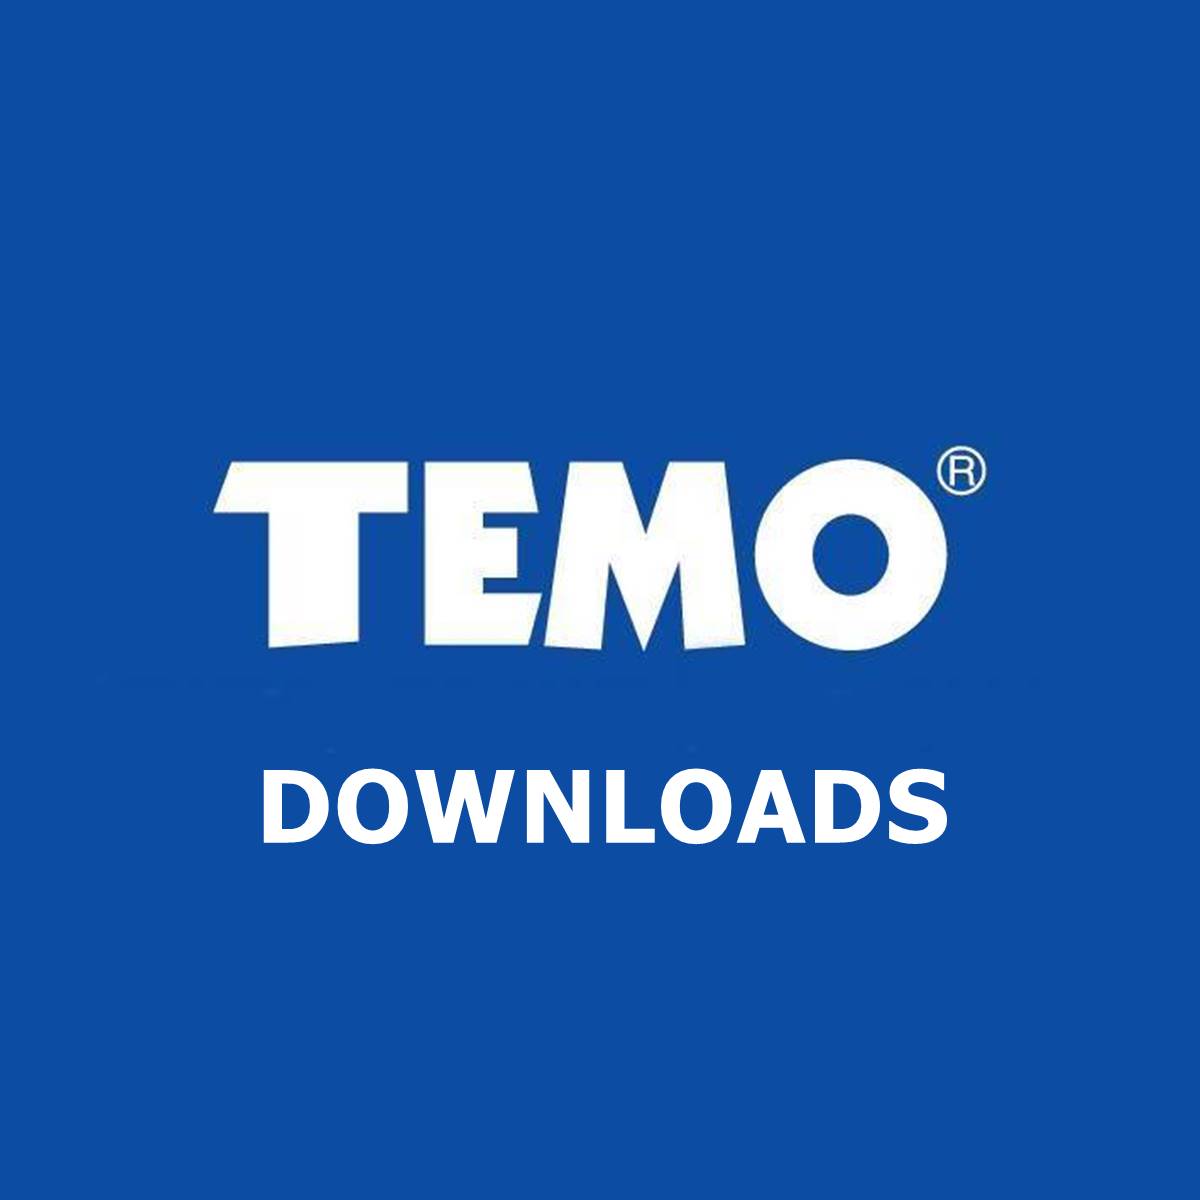 How to Download a File or shorten a URL on Temo Downloads?